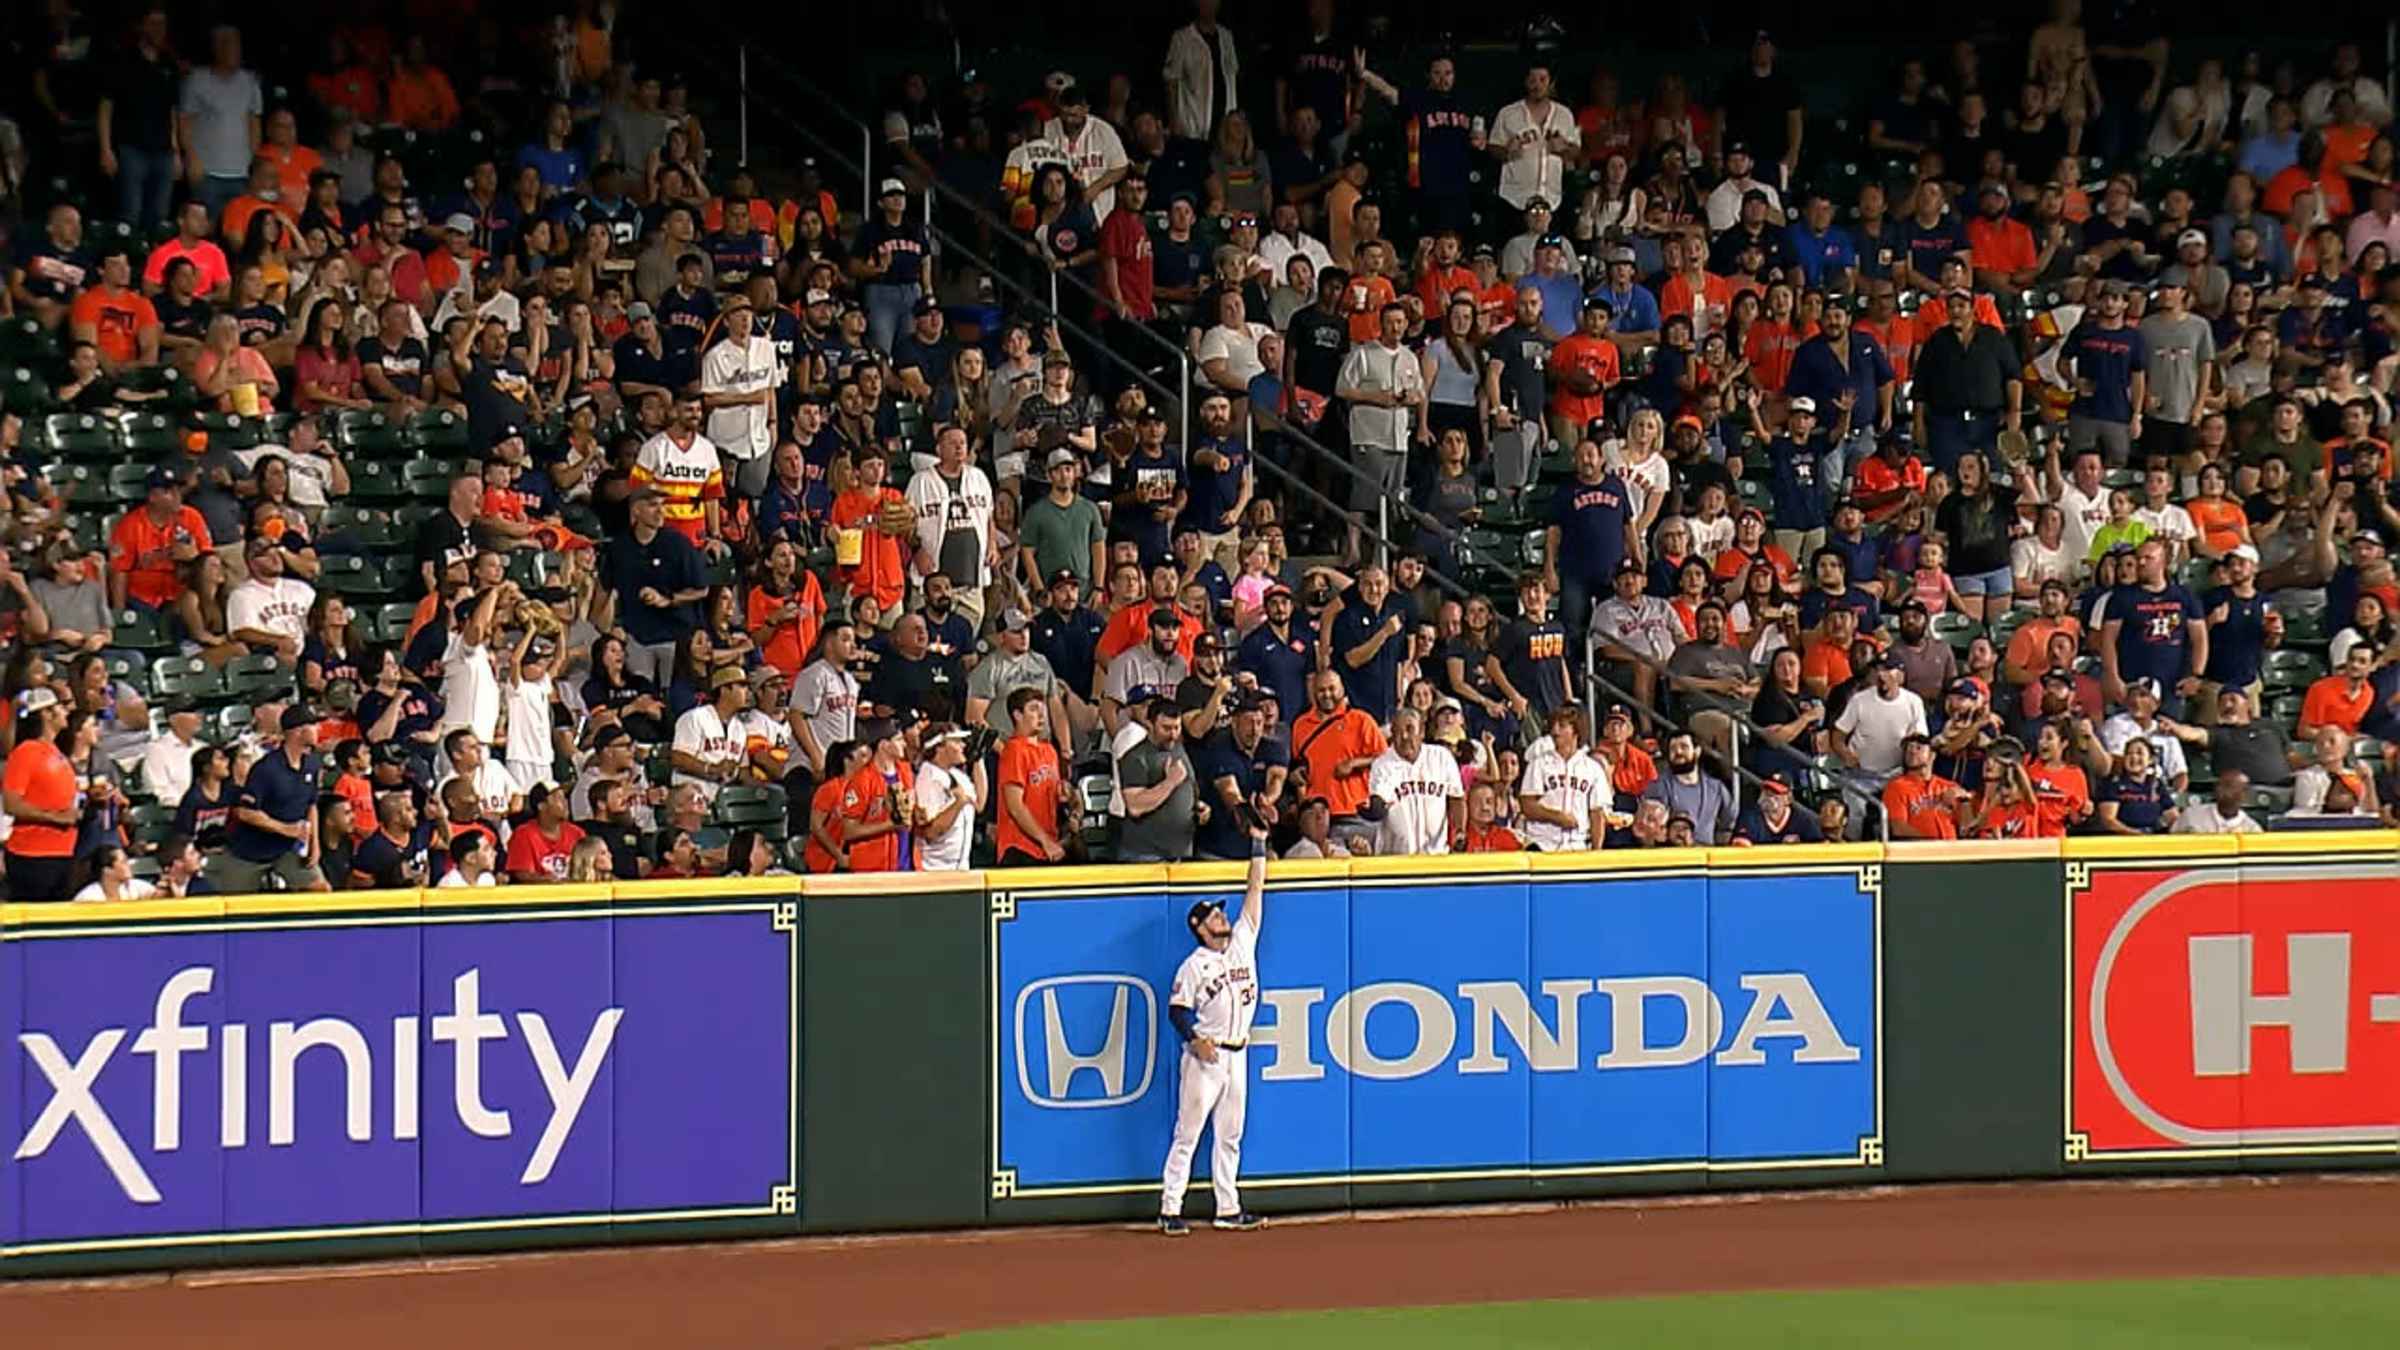 Houston Astros right fielder Kyle Tucker (30) makes a catch during